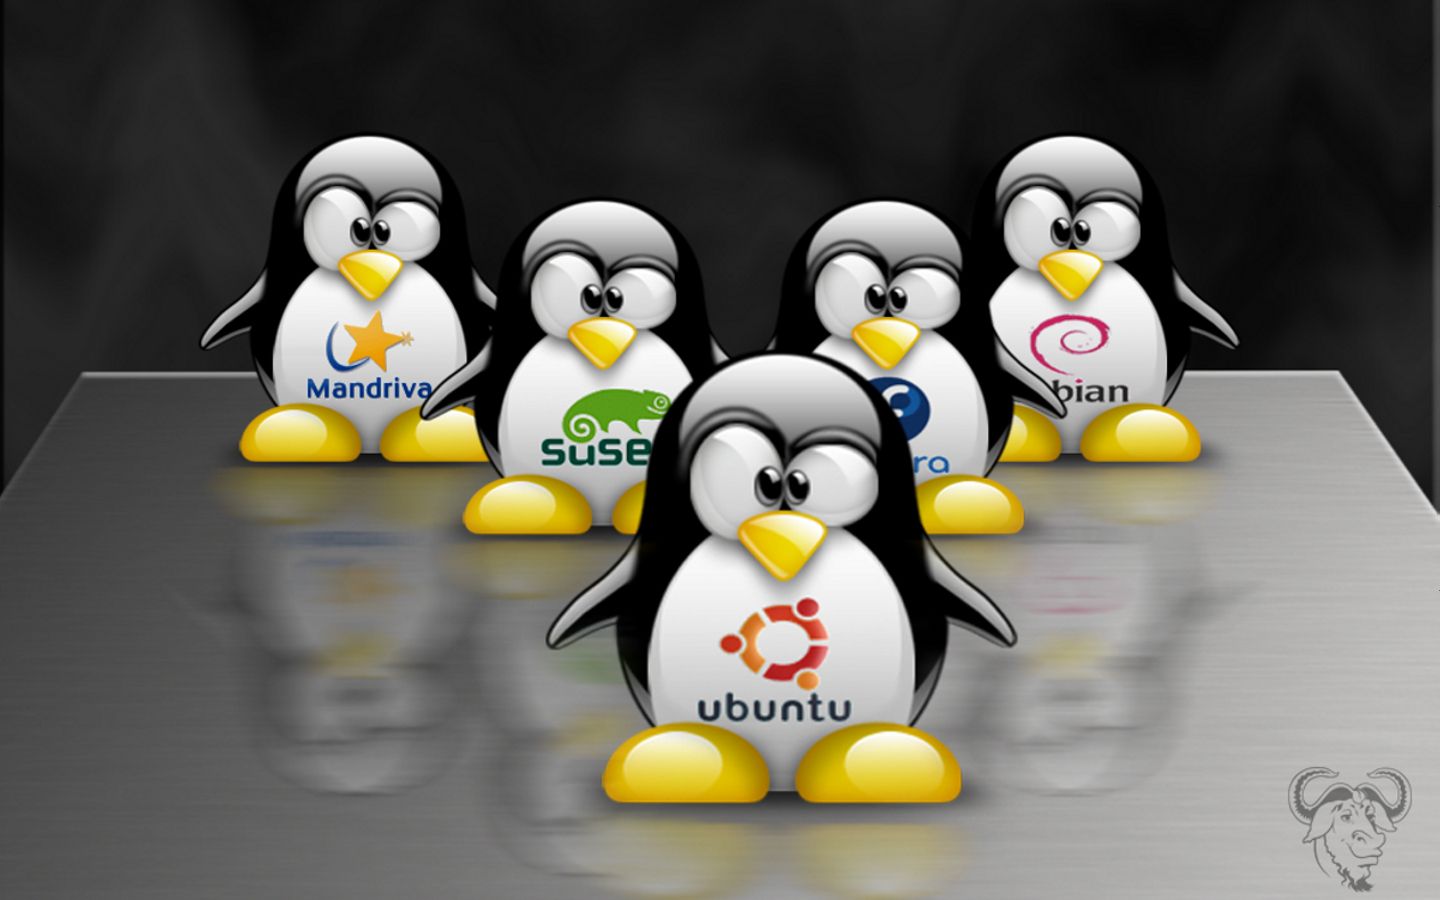 Free Linux Wallpapers - Linux Stickers and T Shirts